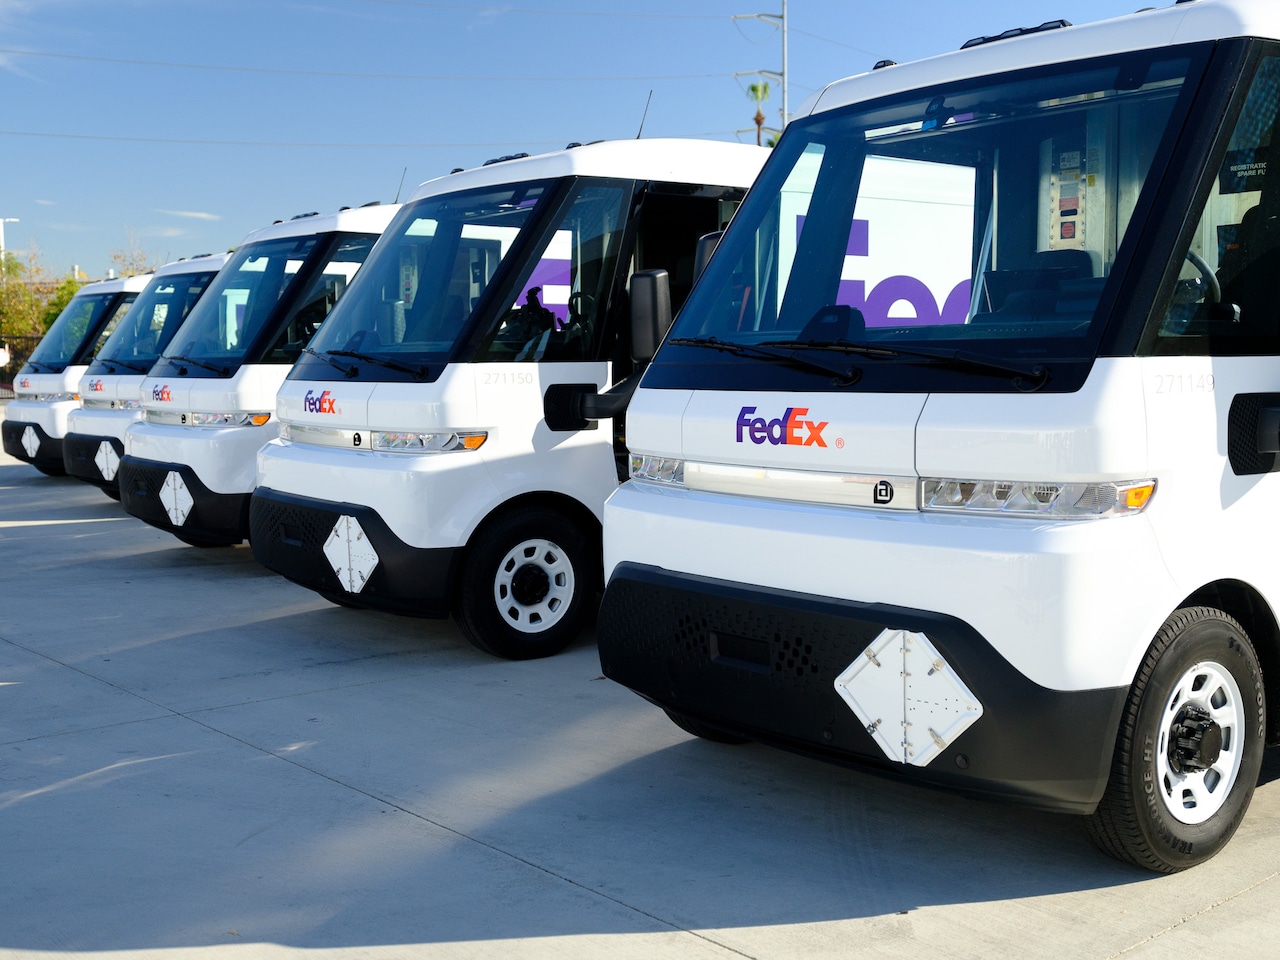 FedEx Receives First All-Electric, Zero-Tailpipe Emissions Delivery Vehicles from BrightDrop